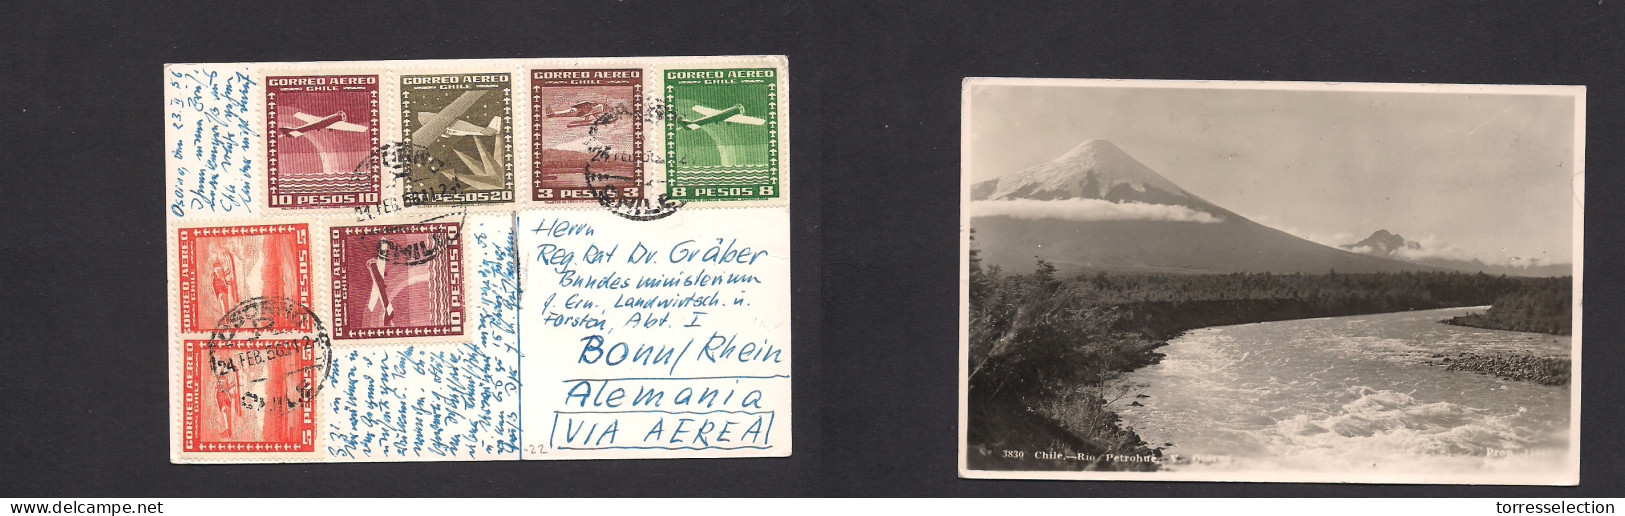 Chile - XX. 1956 (24 Febr) Osorno - West Germany, Bonn. Air Multifkd Env At 61 Pesos Rate, Tied Cds. Attractive. XSALE. - Chili